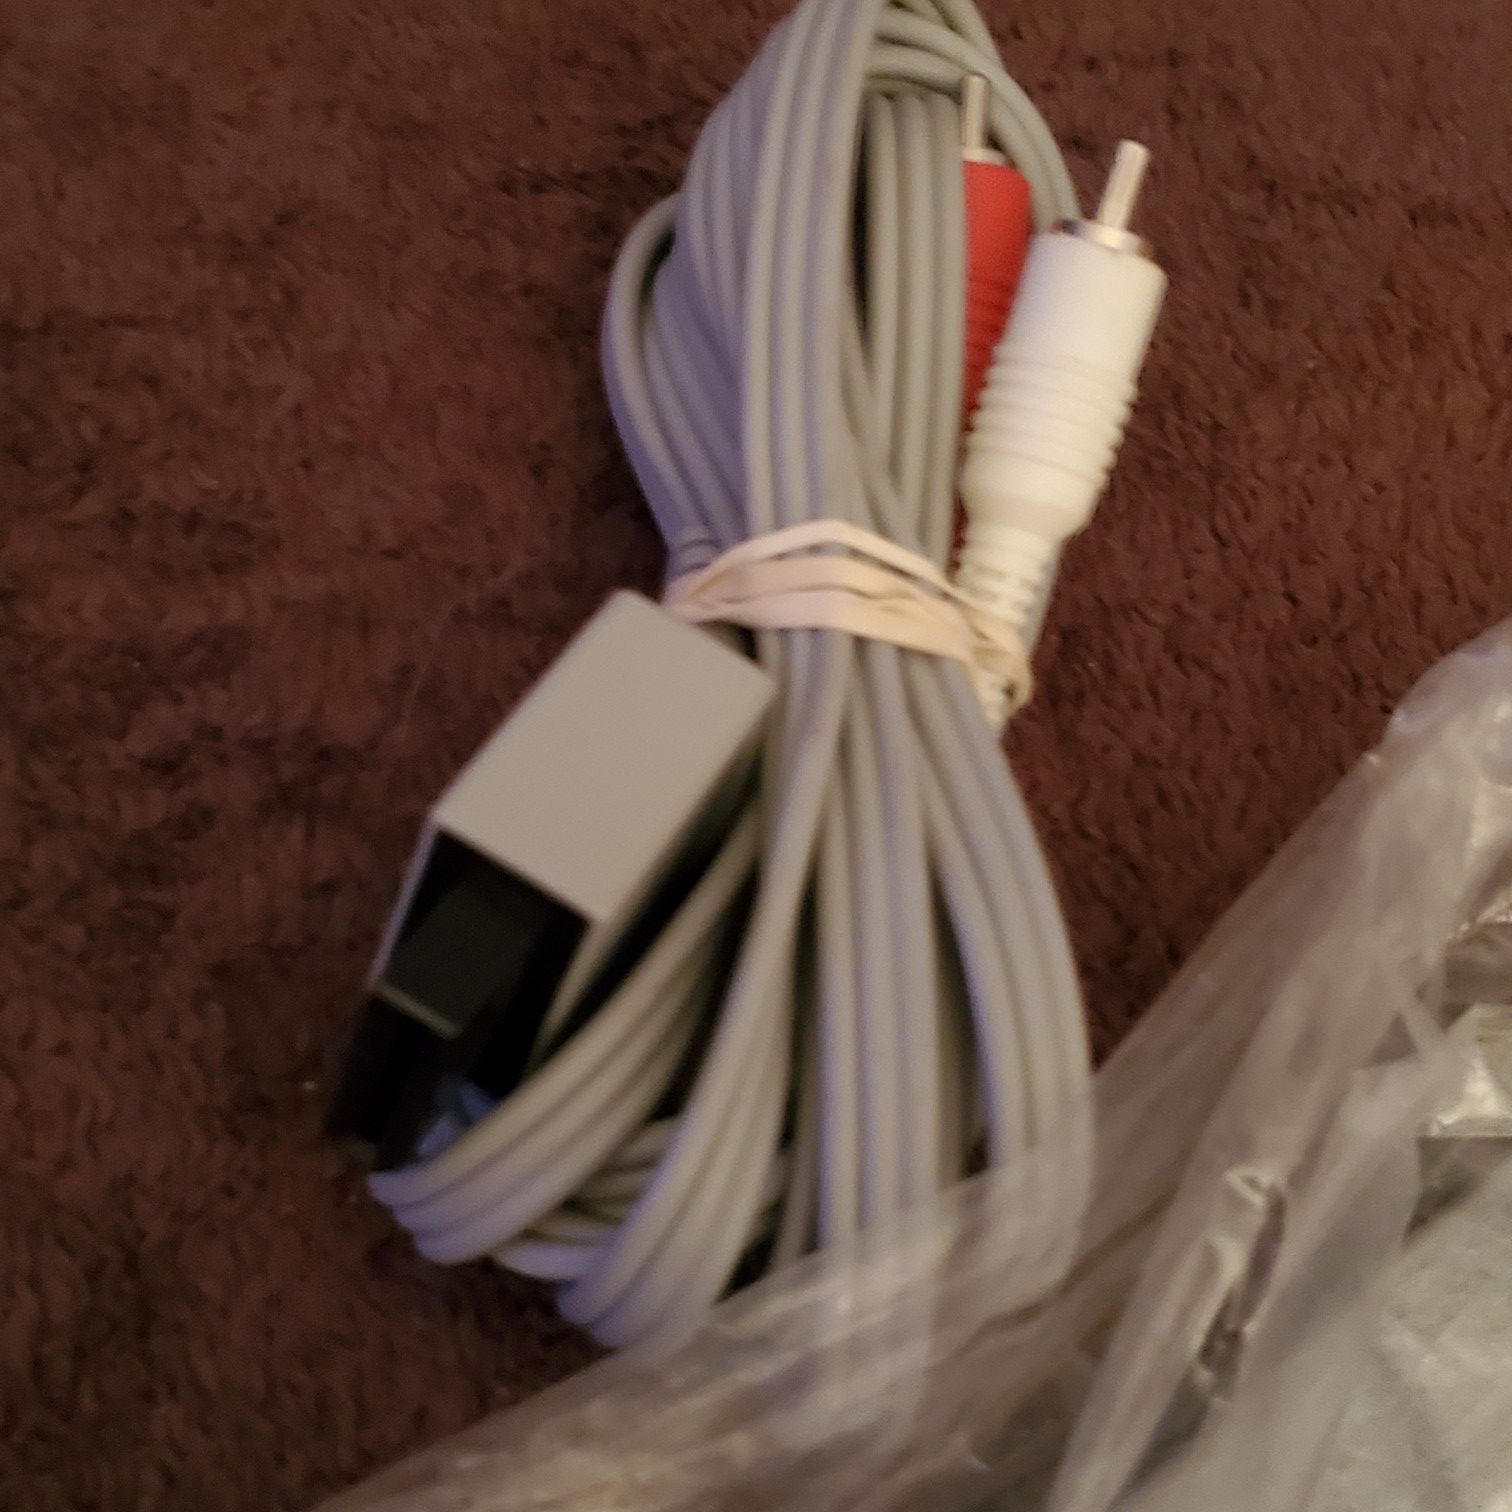 Nintendo Wii video & motion cords